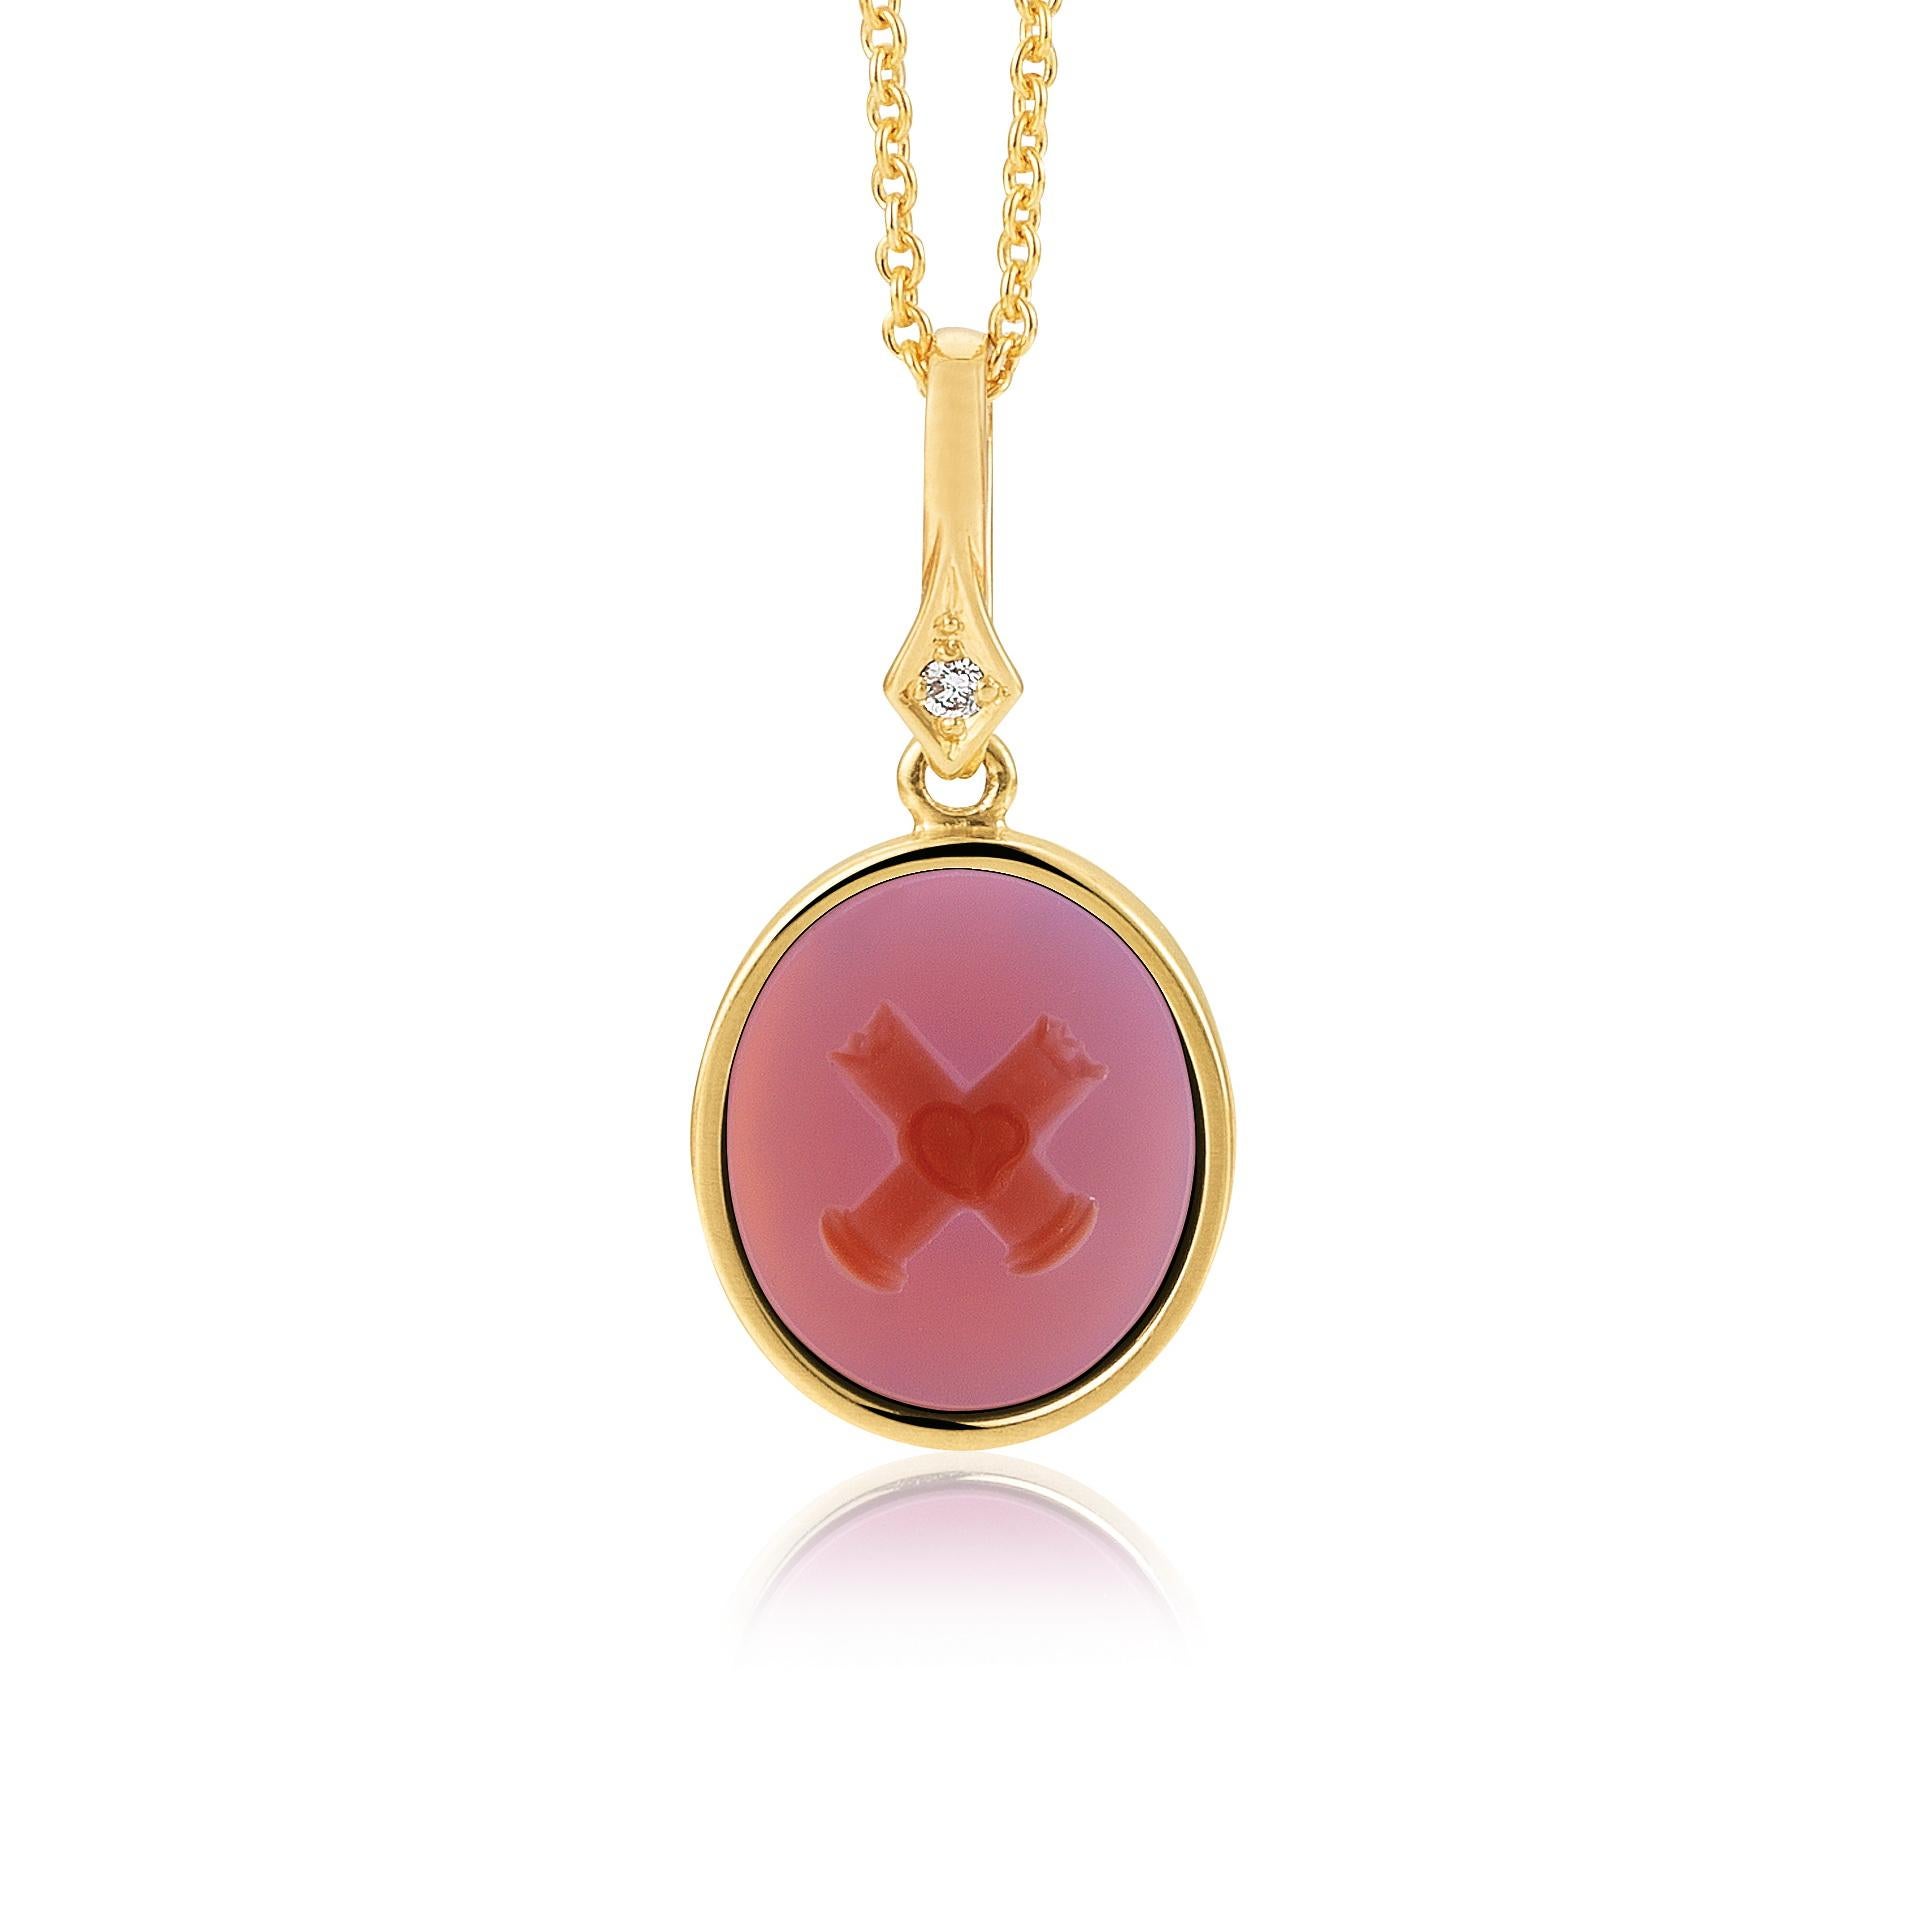 Victor Mayer oval fortitudo pendant 18k yellow gold, Darcy & Elizabeth collection, 1 diamond, total 0.02 ct G VS brilliant cut, pink carnelian onyx

About the creator Victor Mayer
Victor Mayer is internationally renowned for elegant timeless designs